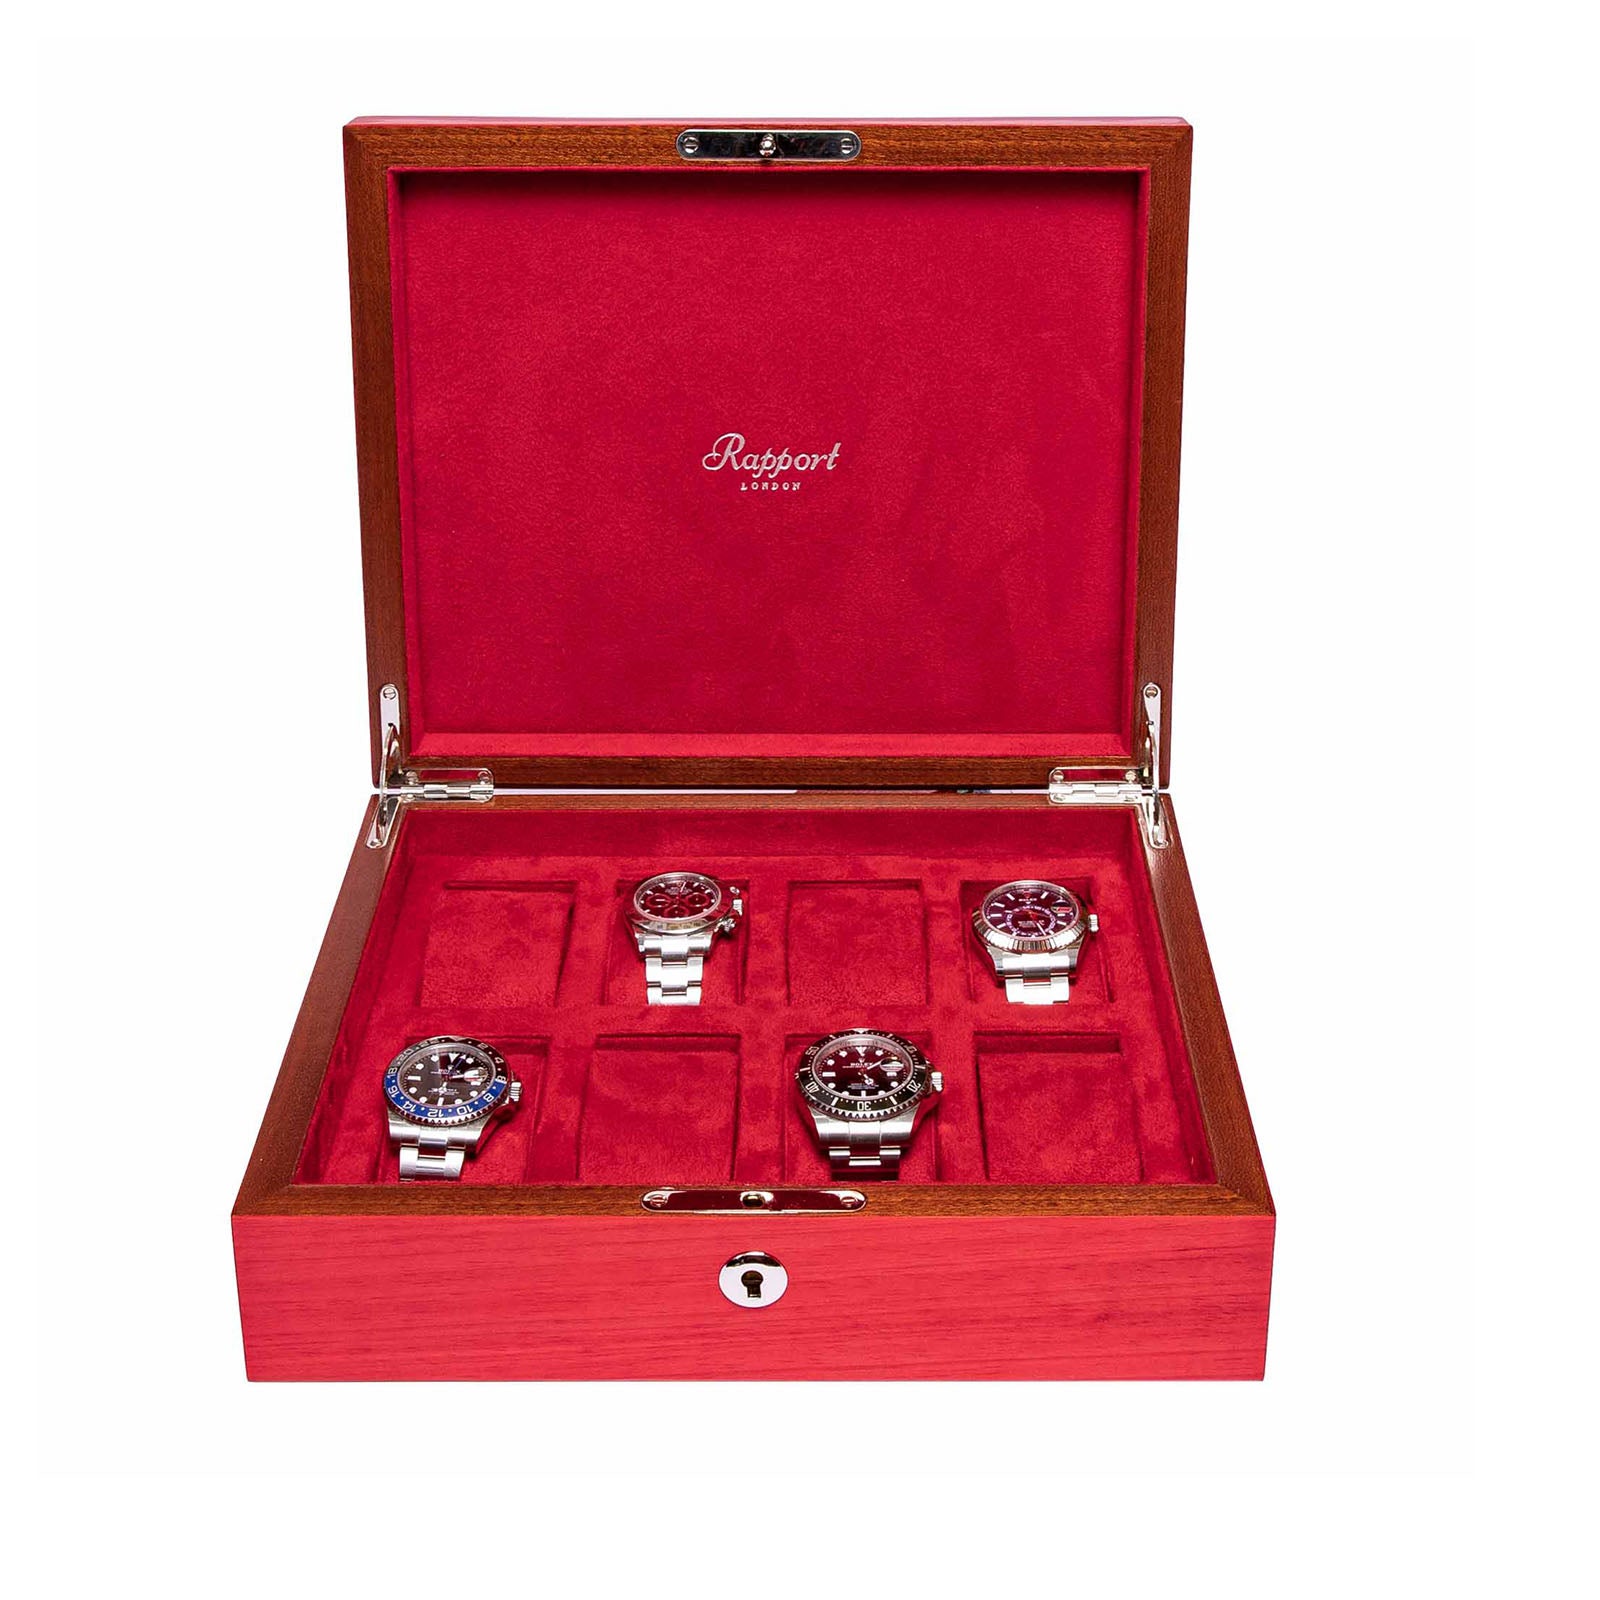 rapport-8-piece-watch-box-heritage-red-l421